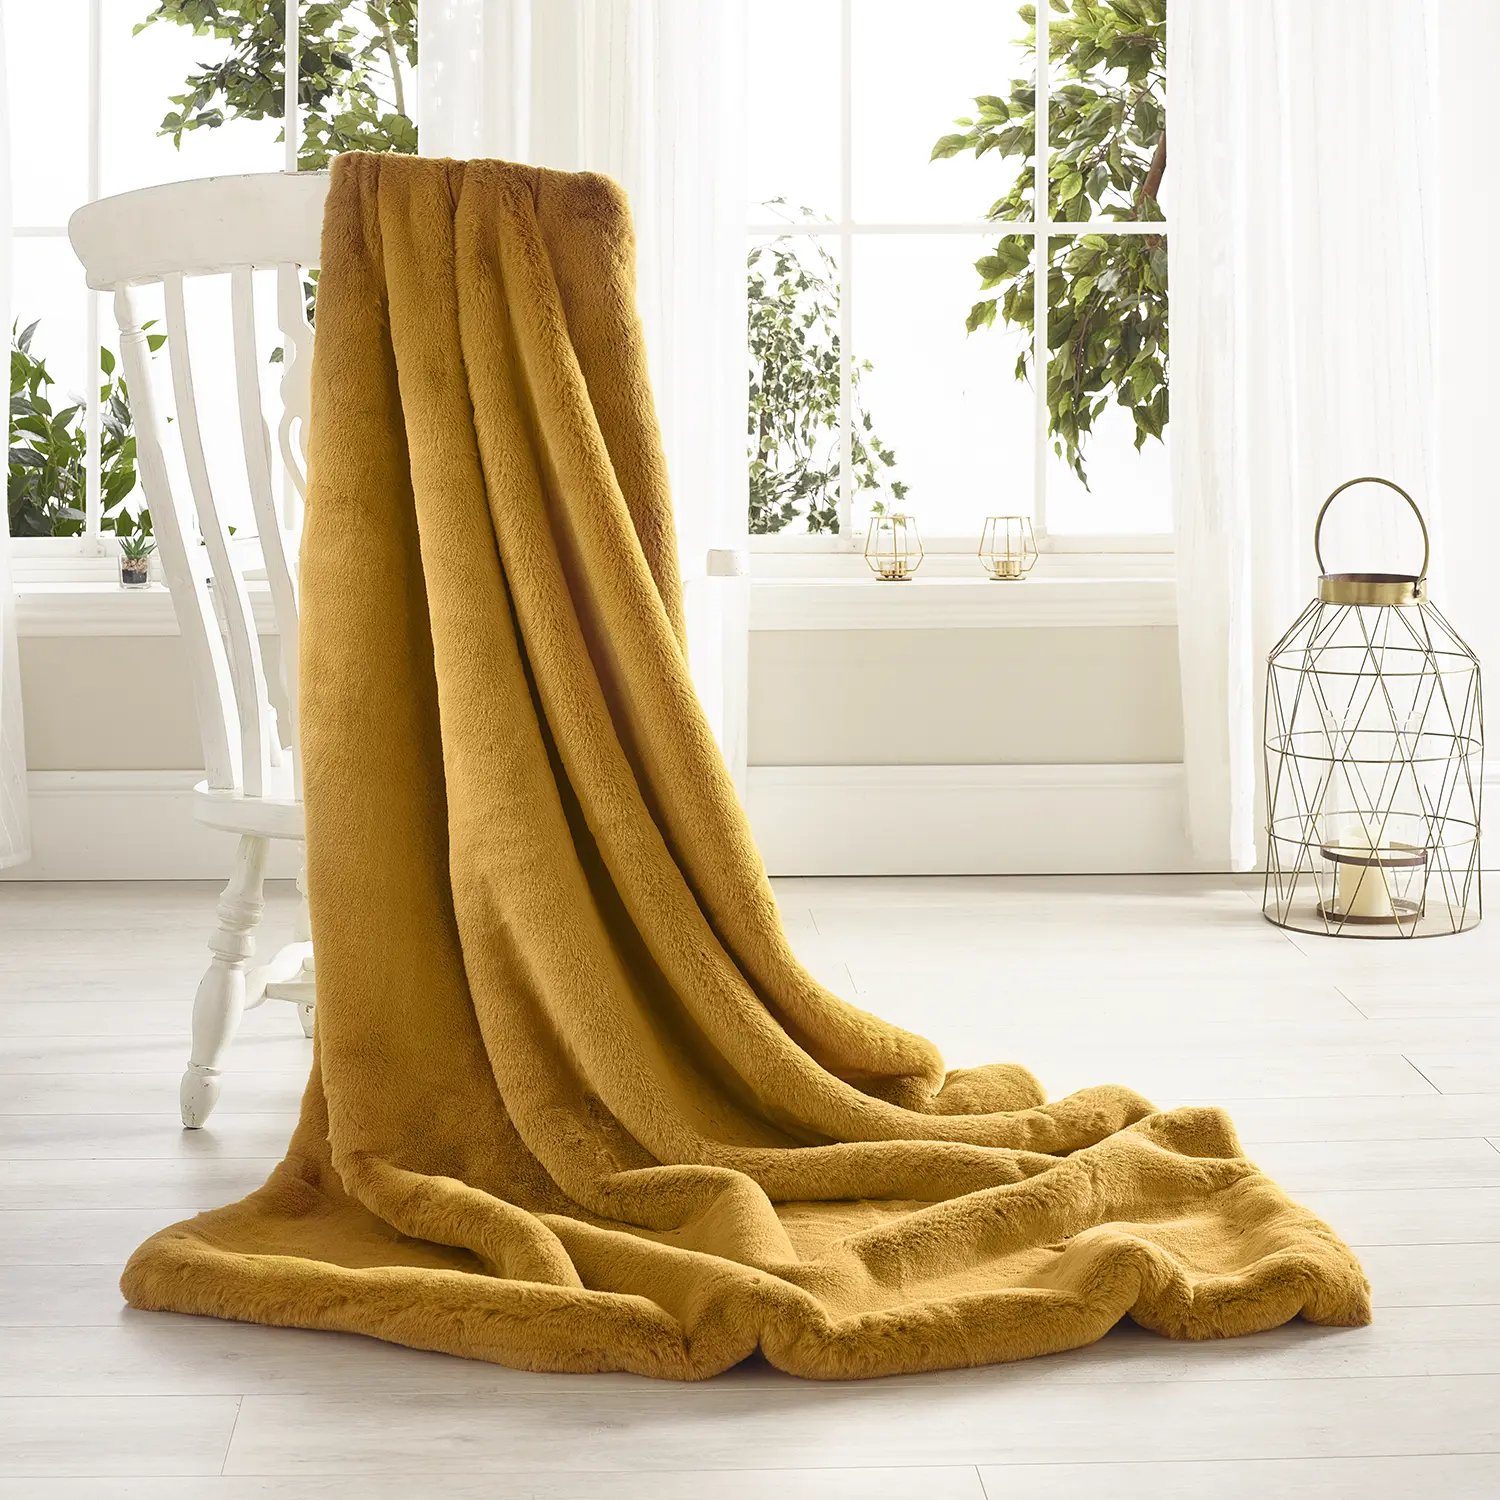 Soft Mustard Luxury Faux Fur Throws And